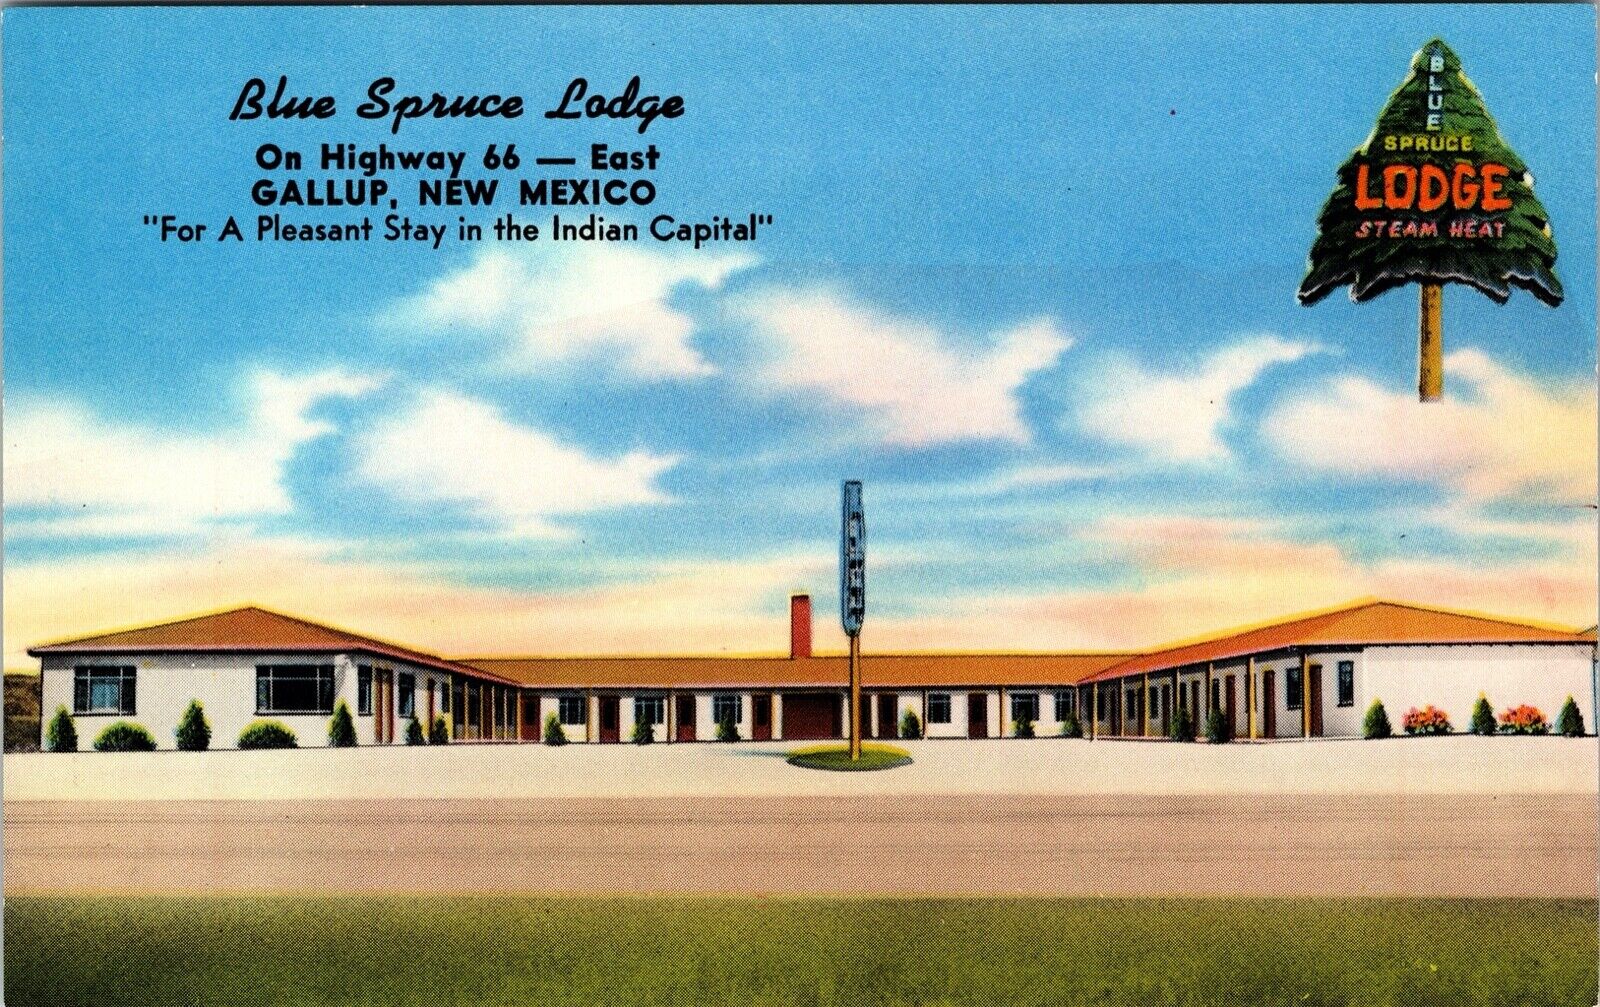 1956 Hwy Route 66 Blue Spruce Lodge Gallup NM Roadside Motel Postcard New Mexico